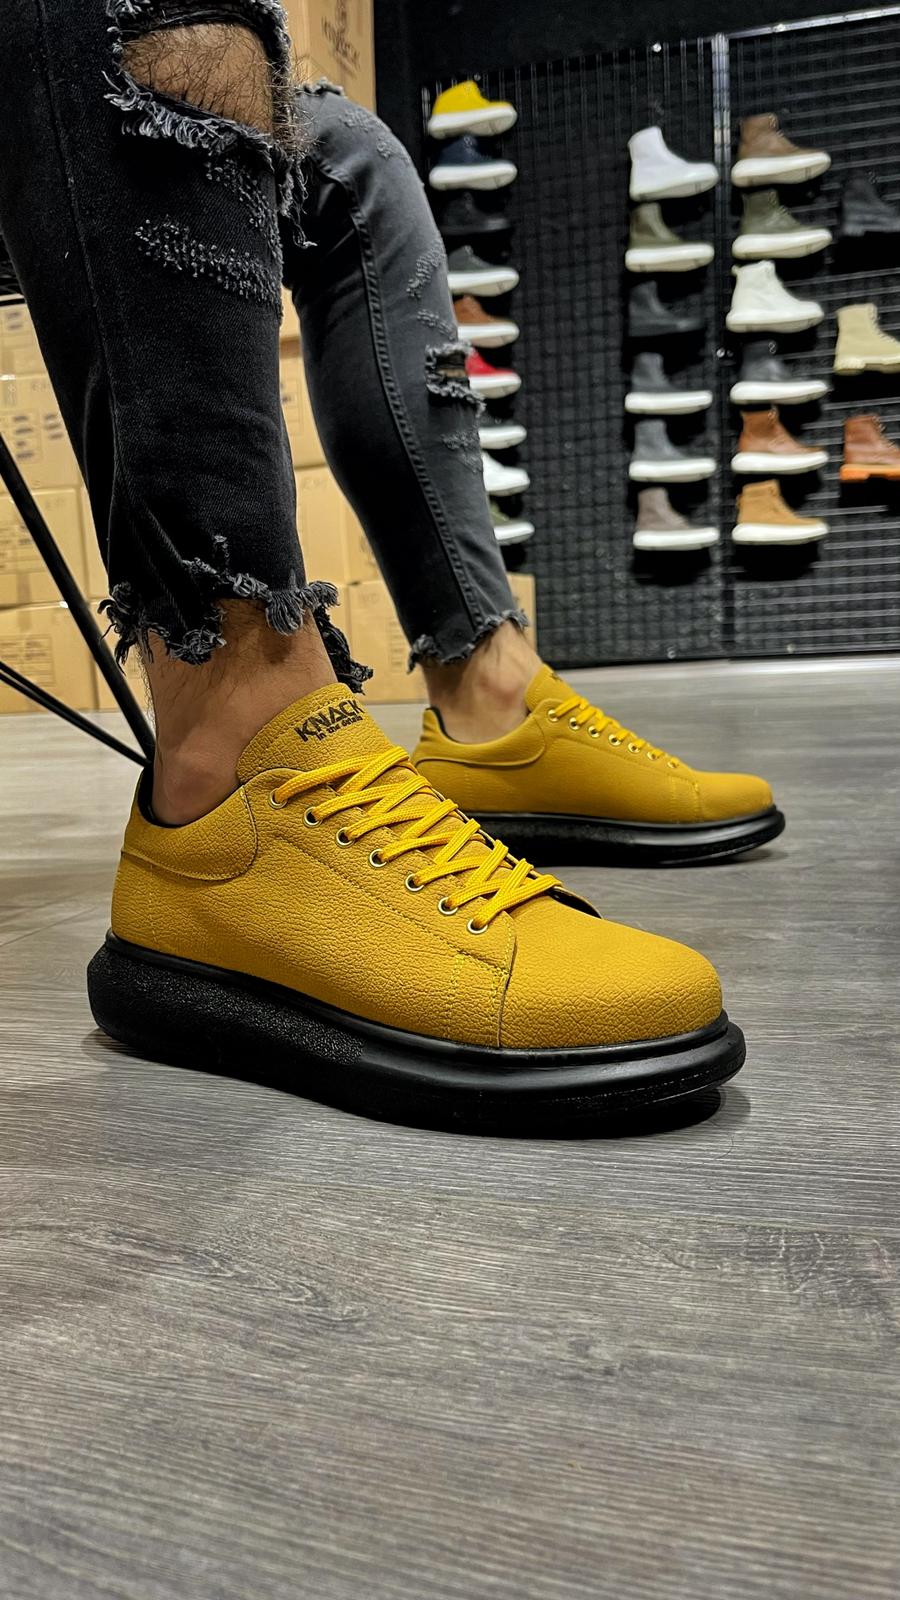 Knack High Sole Casual Shoes 045 Yellow (Black Sole) - STREETMODE™